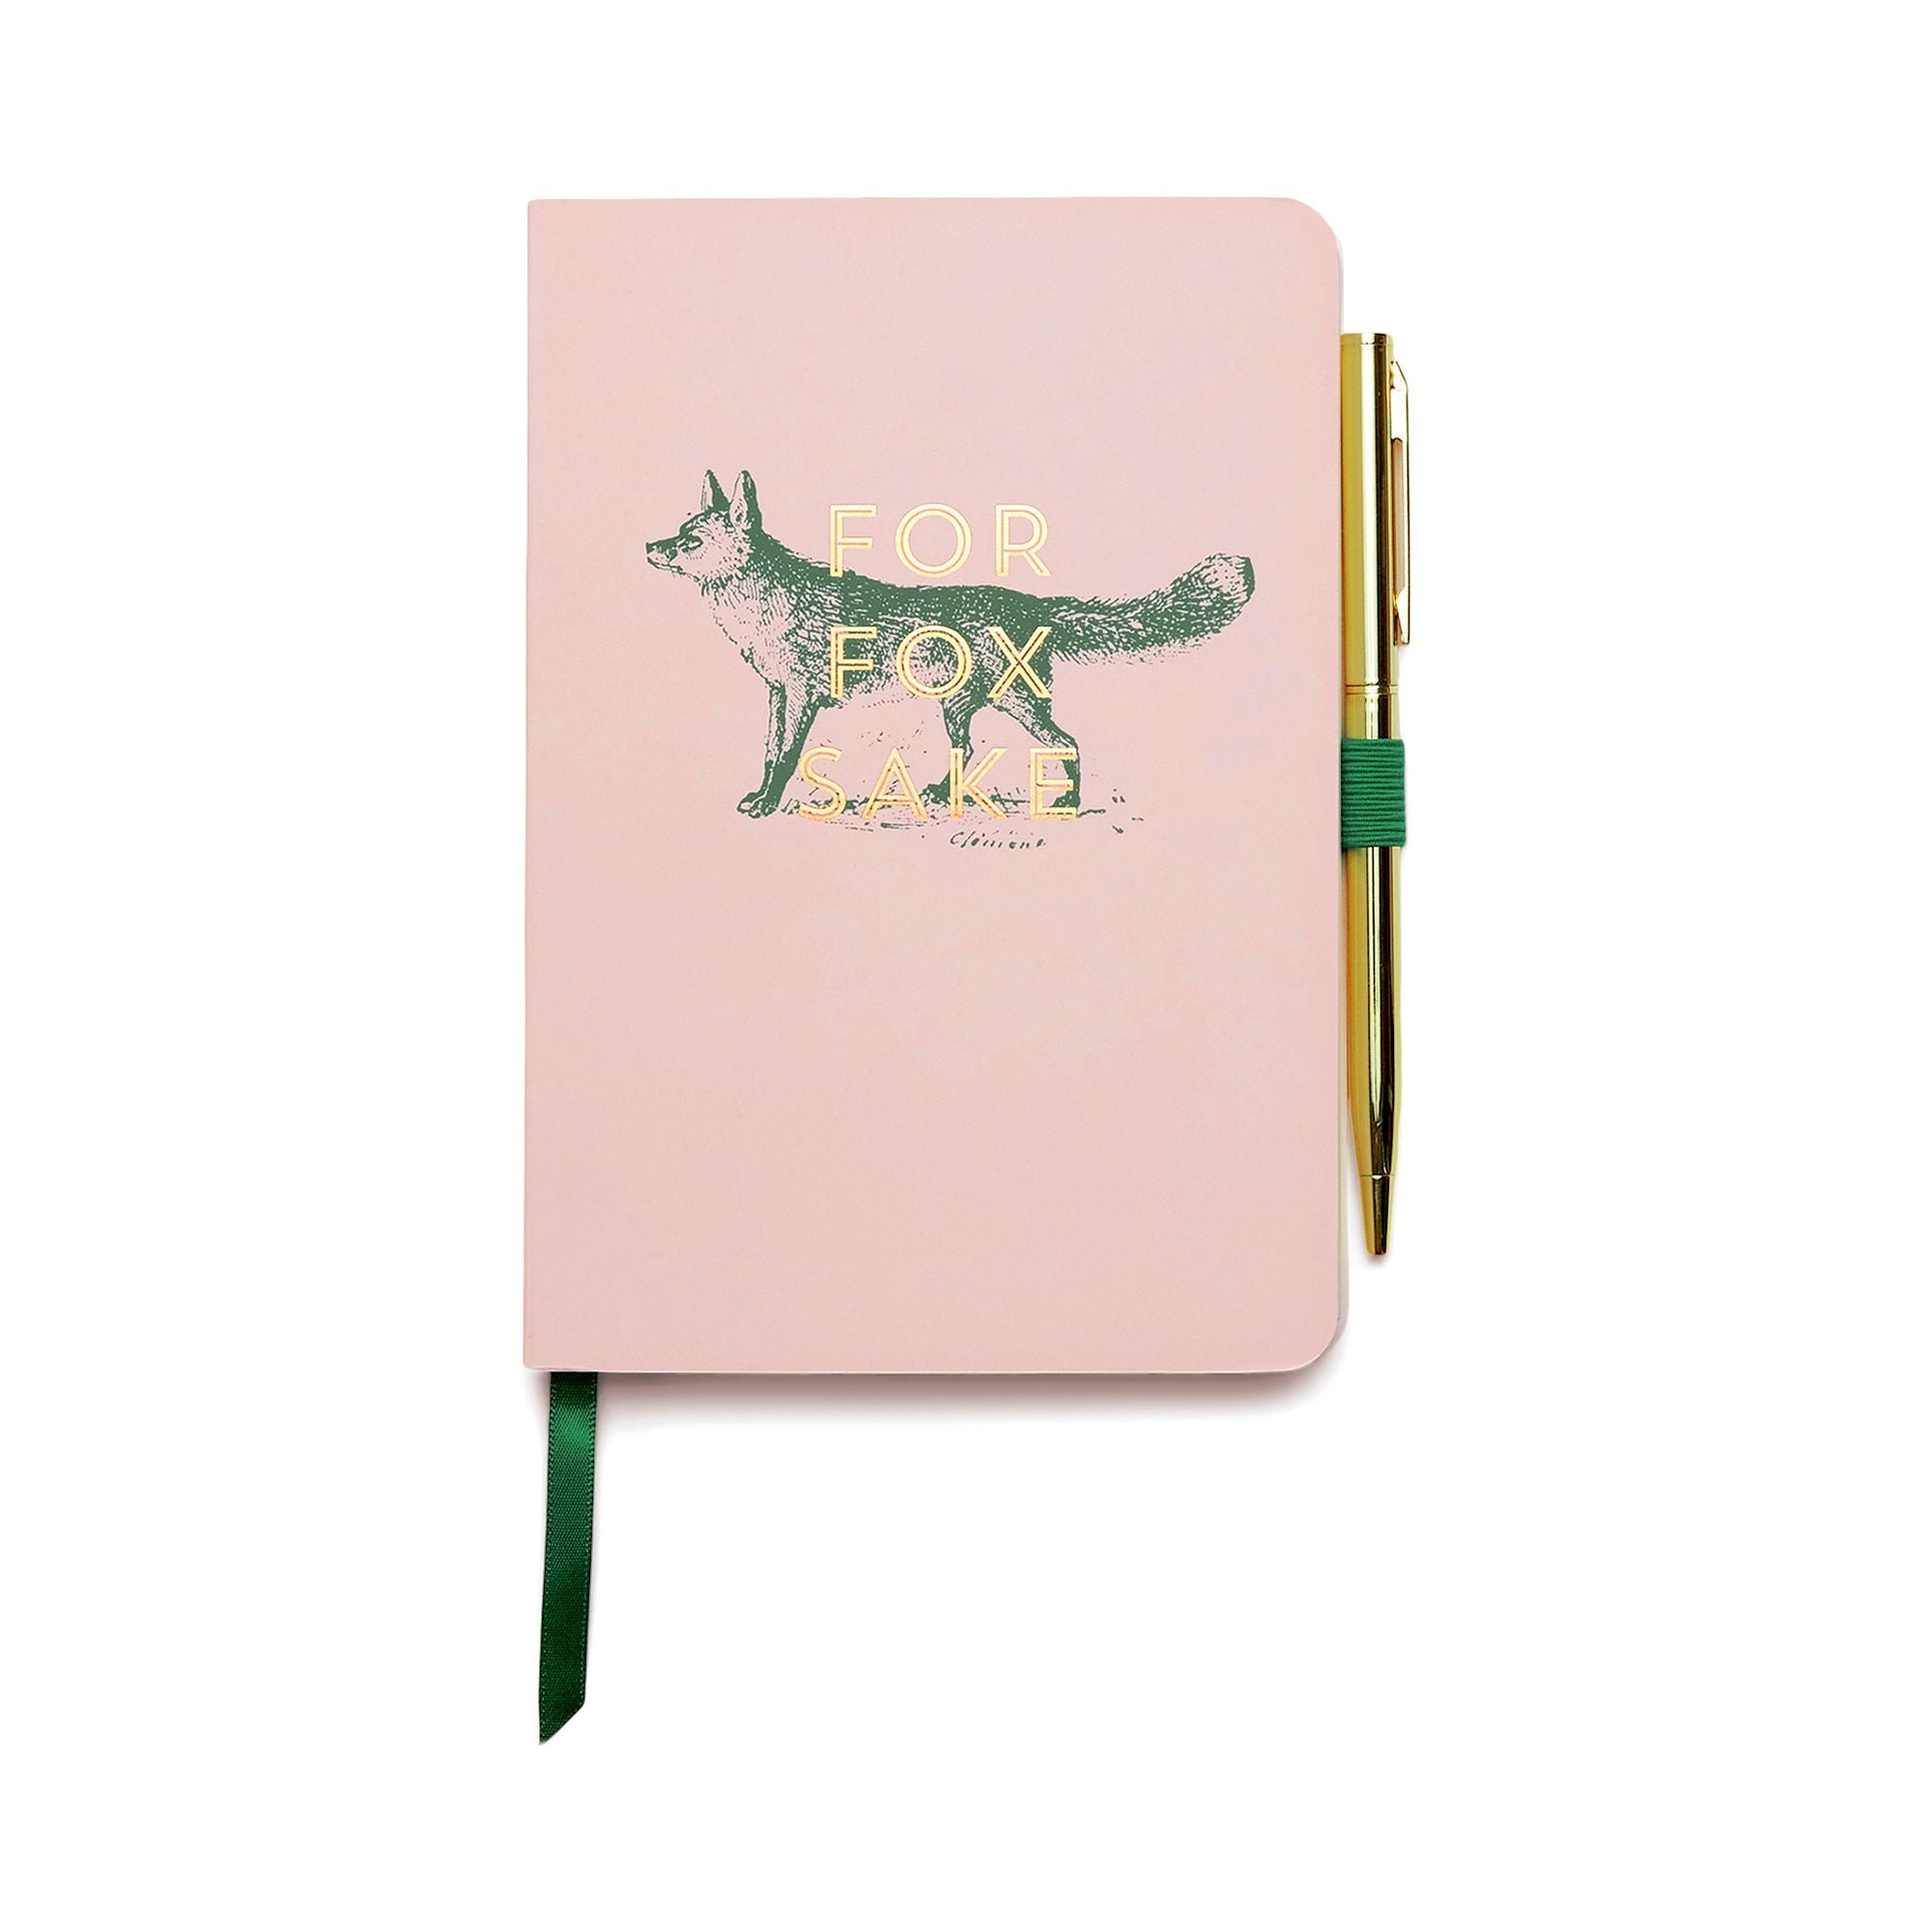 Vintage Sass Notebook with Pen - For Fox Sake